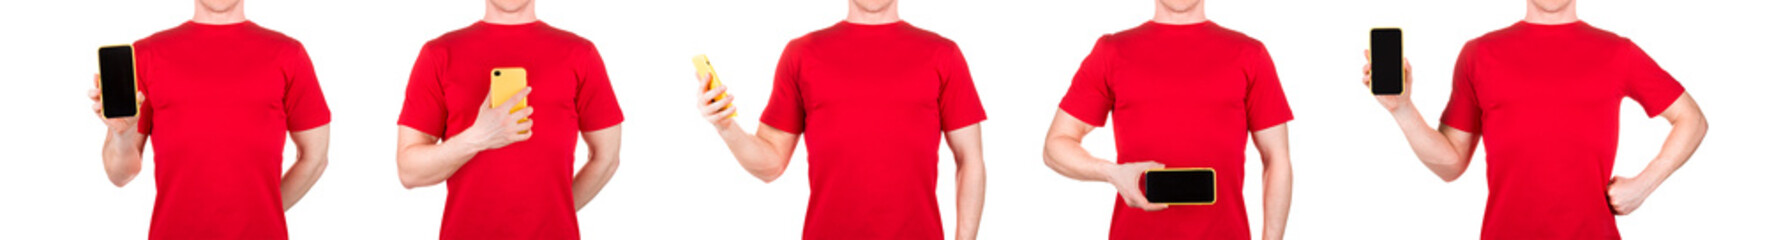 Man in red t-shirt holding mobile phone on his palm isolated white background